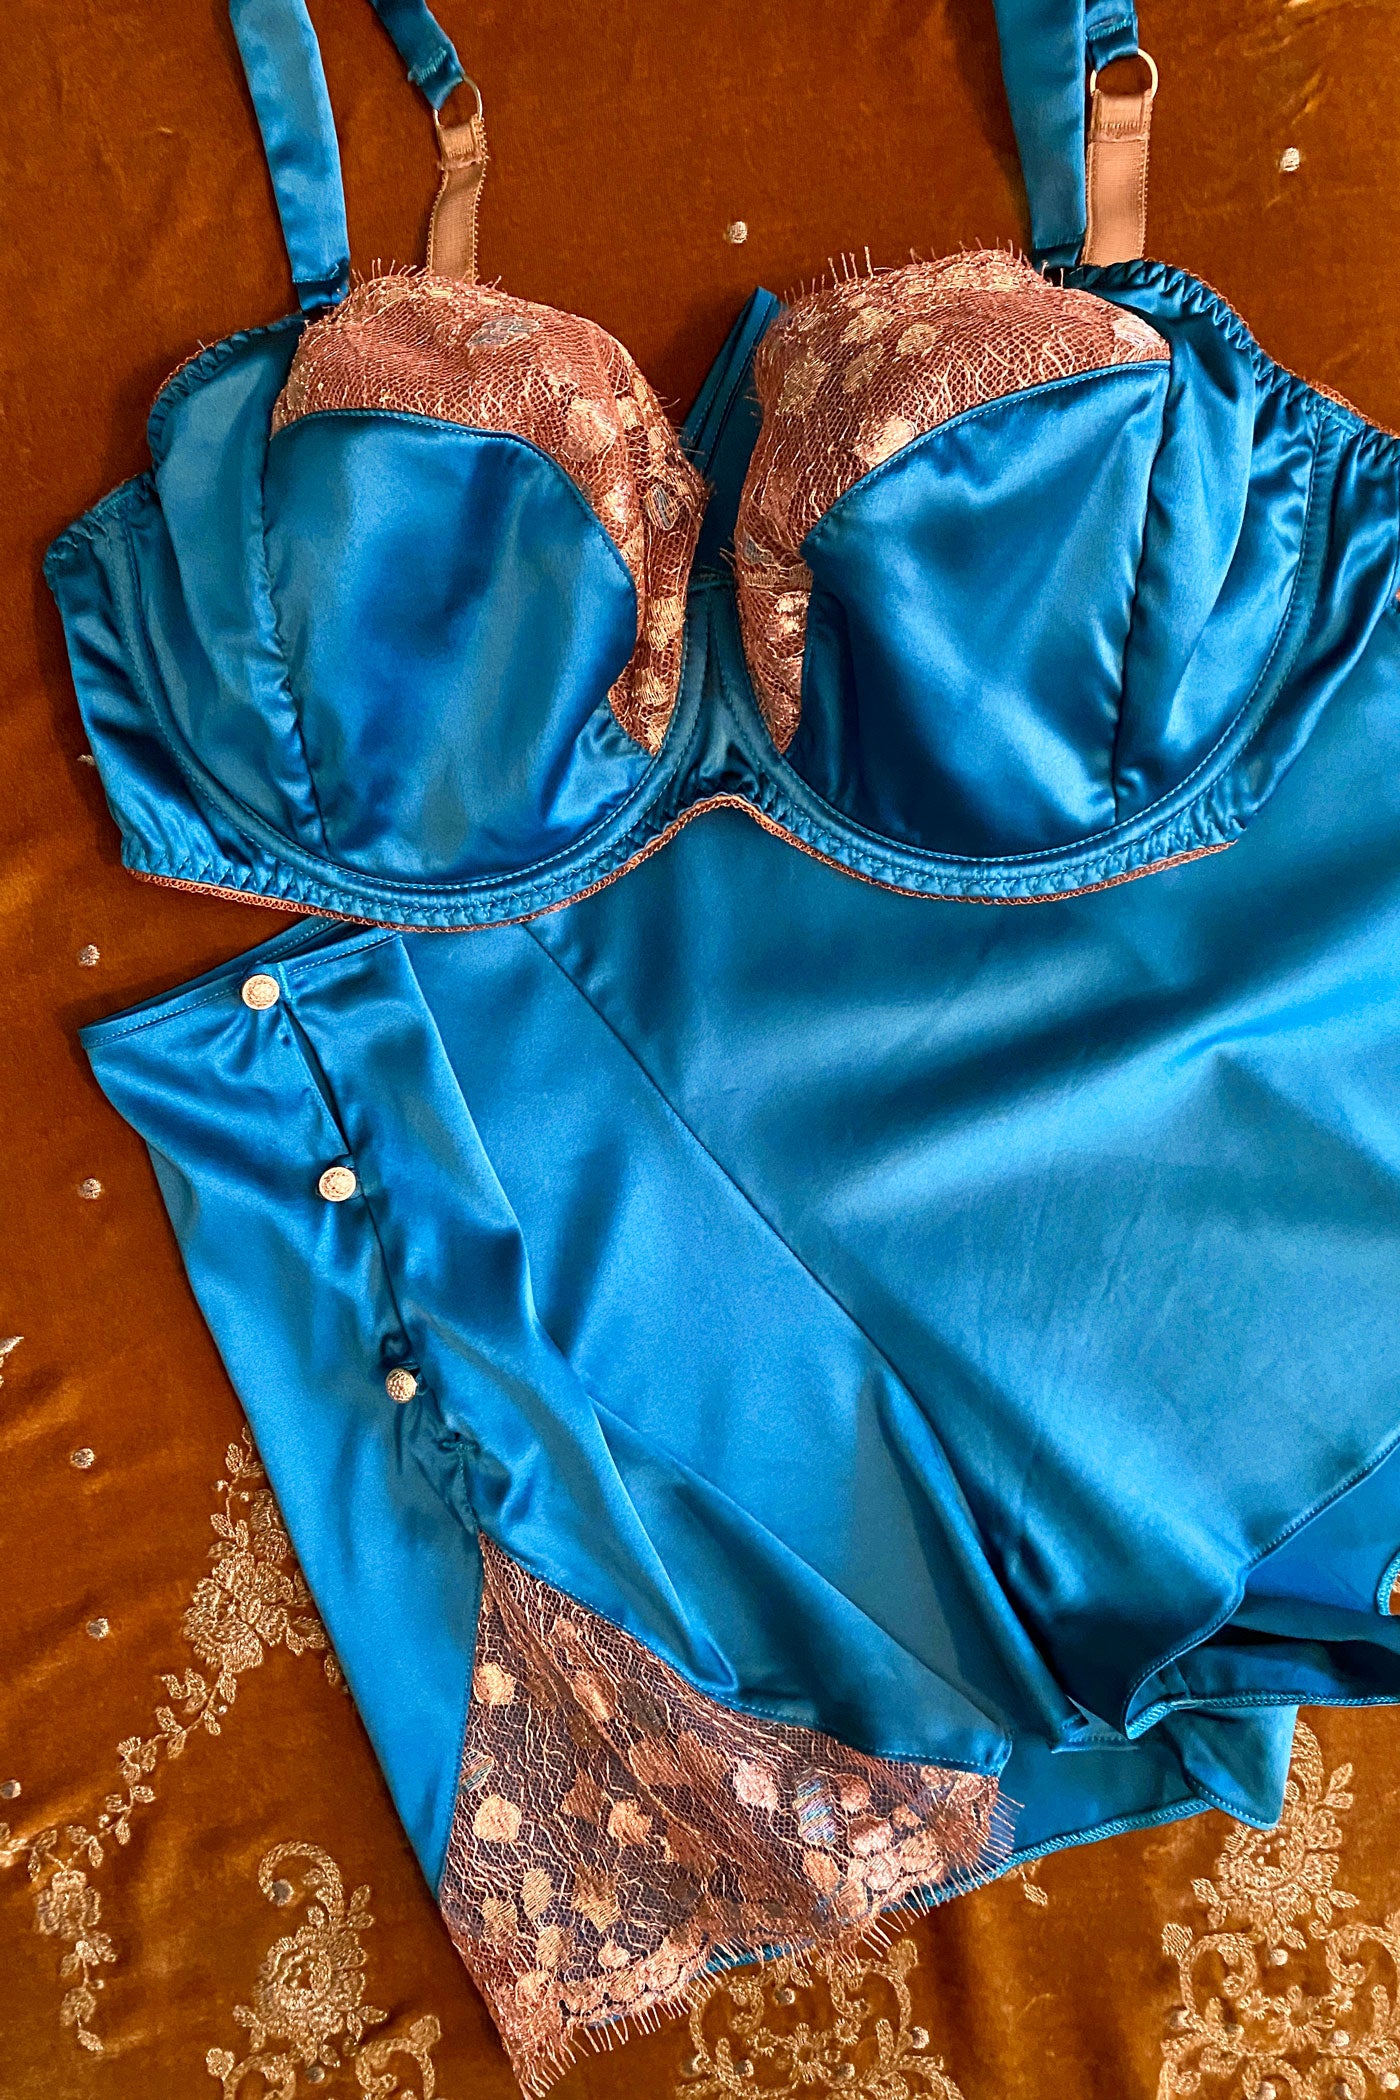 Blue silk bra with metallic gold lace and silk tap pants with gold buttons